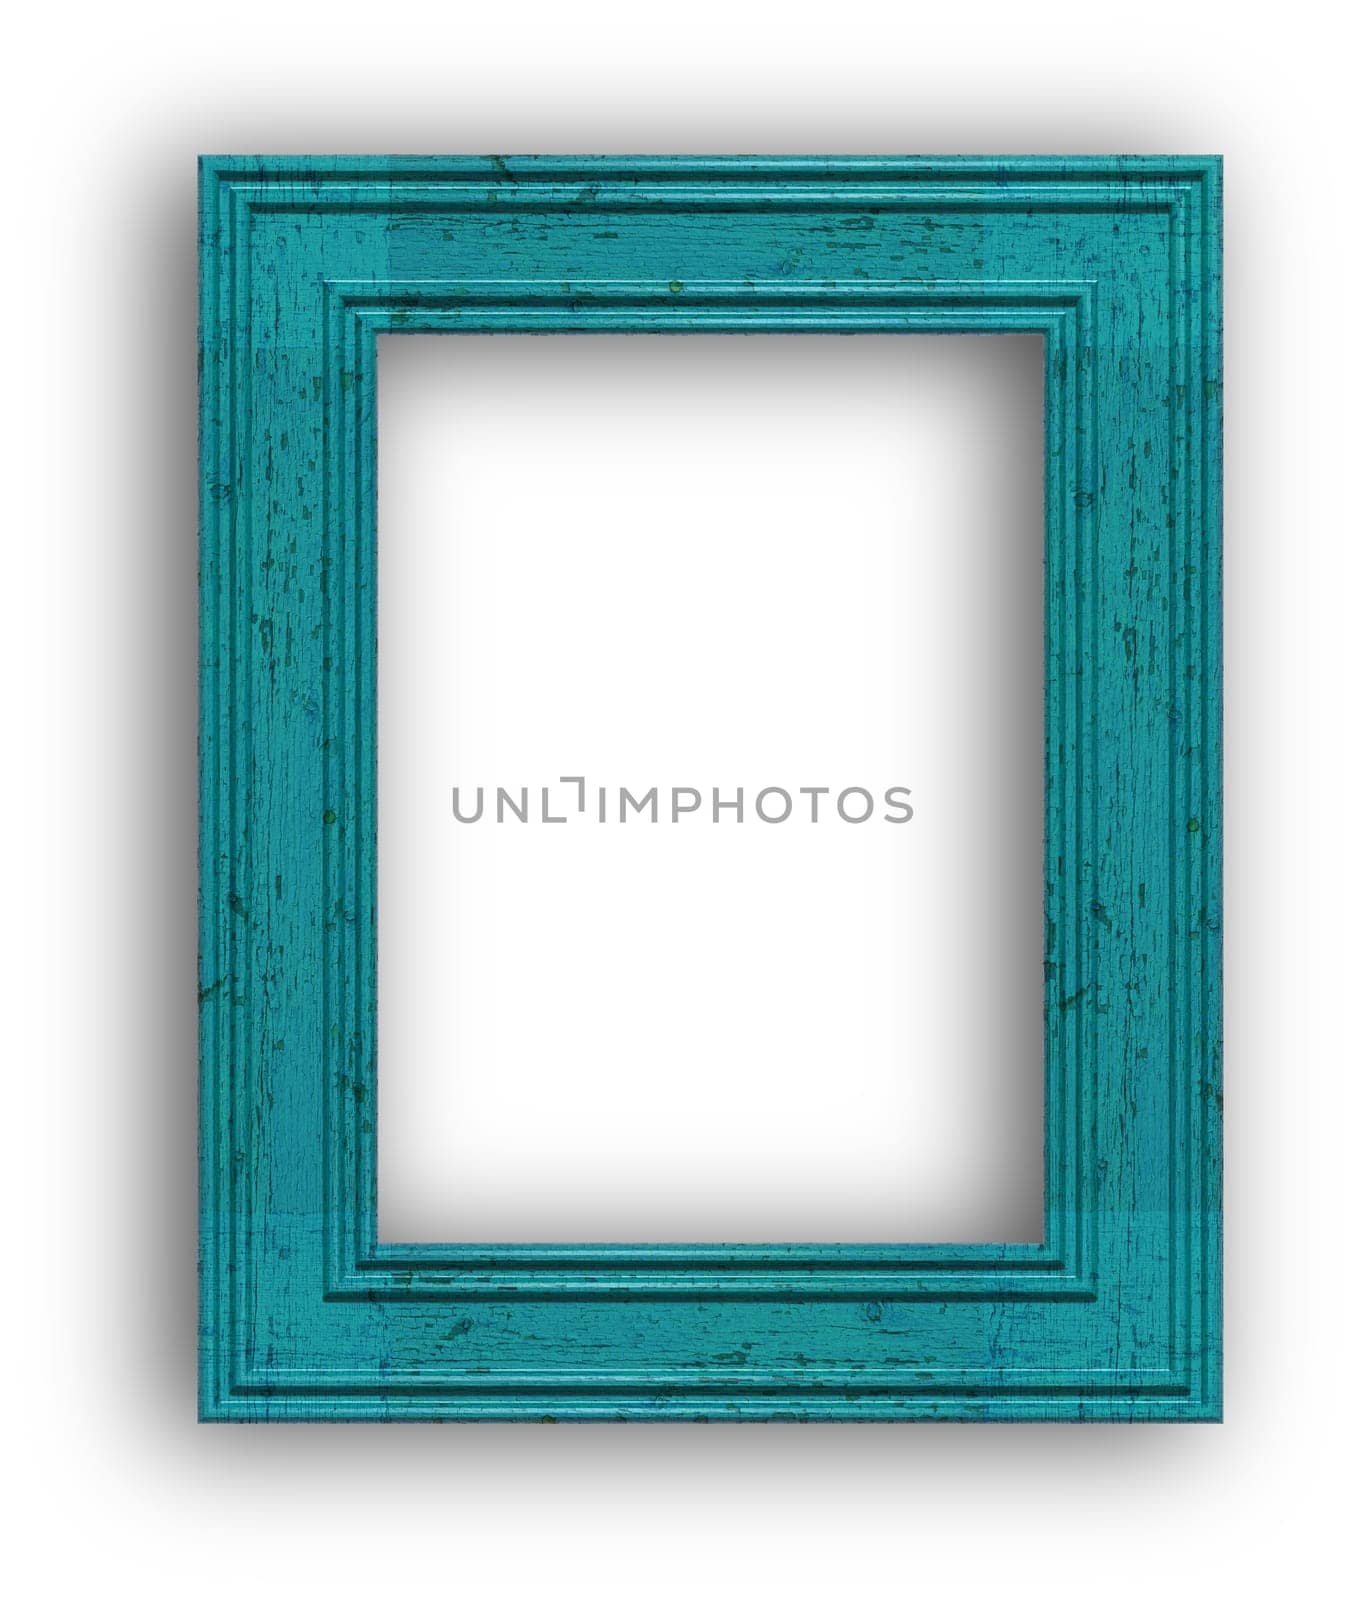 Wooden frame for photos and paintings with shadow on isolated background